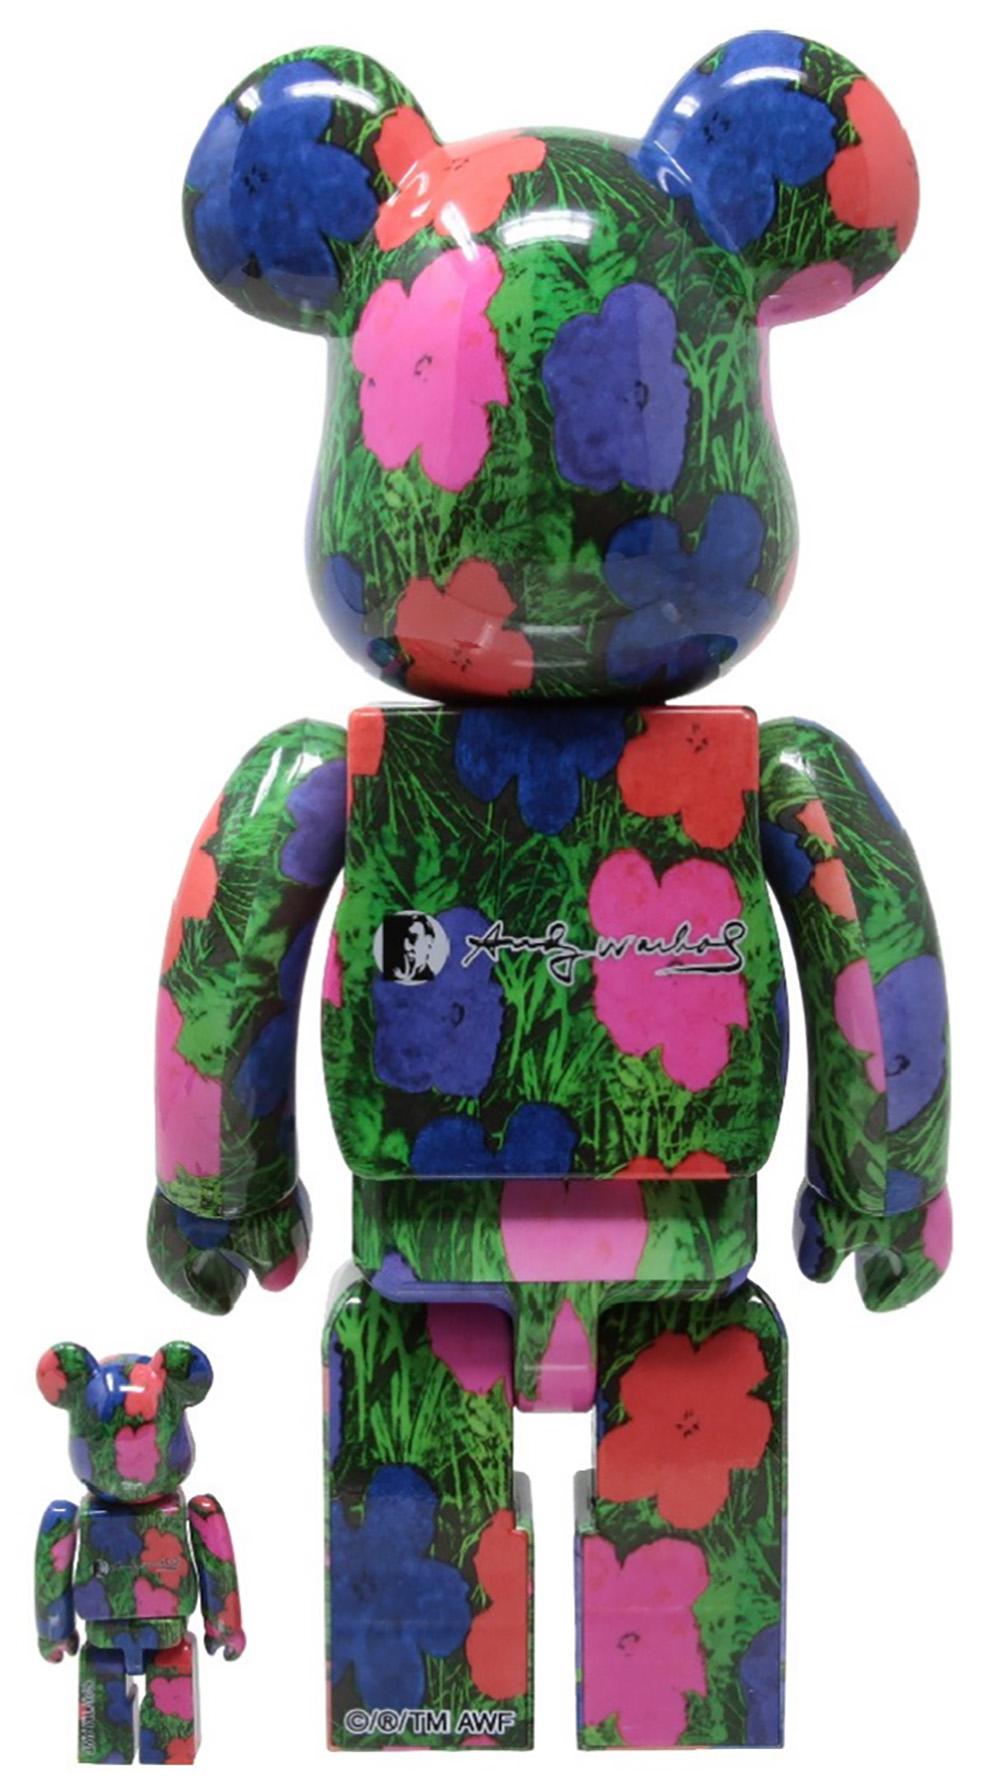 Andy Warhol Flowers Bearbrick 400% Companion (Warhol BE@RBRICK 400%) - Sculpture by (after) Andy Warhol